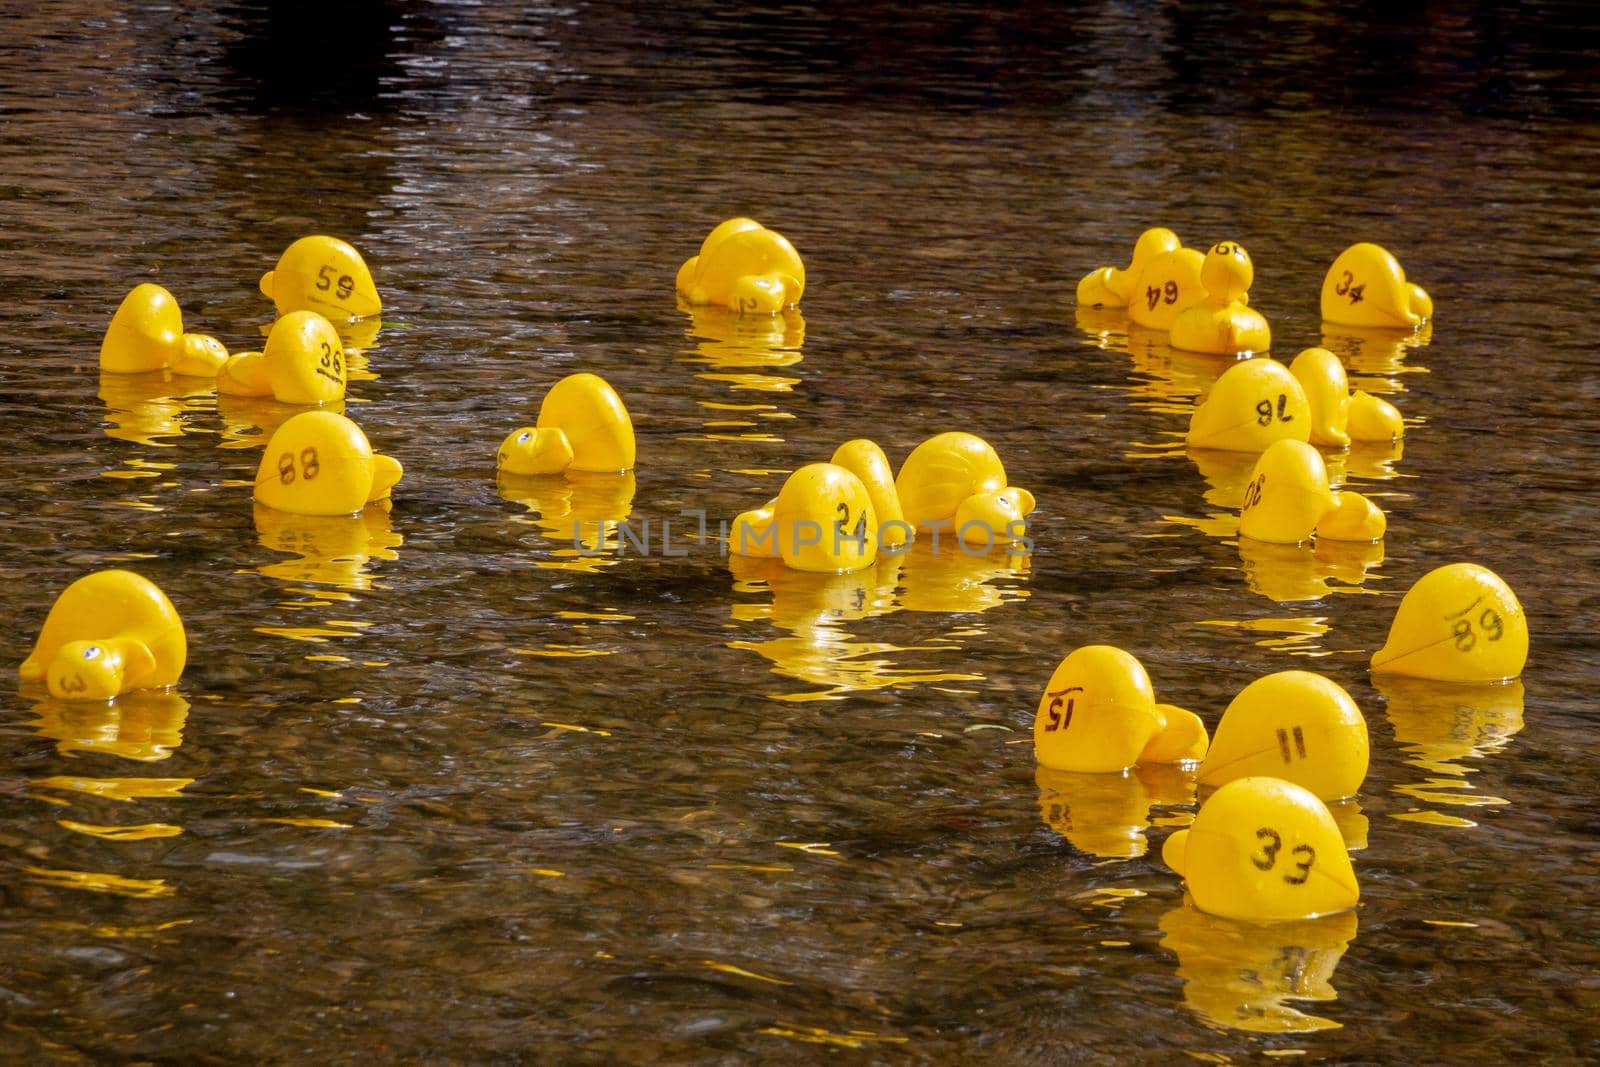 A group of yellow rubber ducks with numbers on them floating on a river